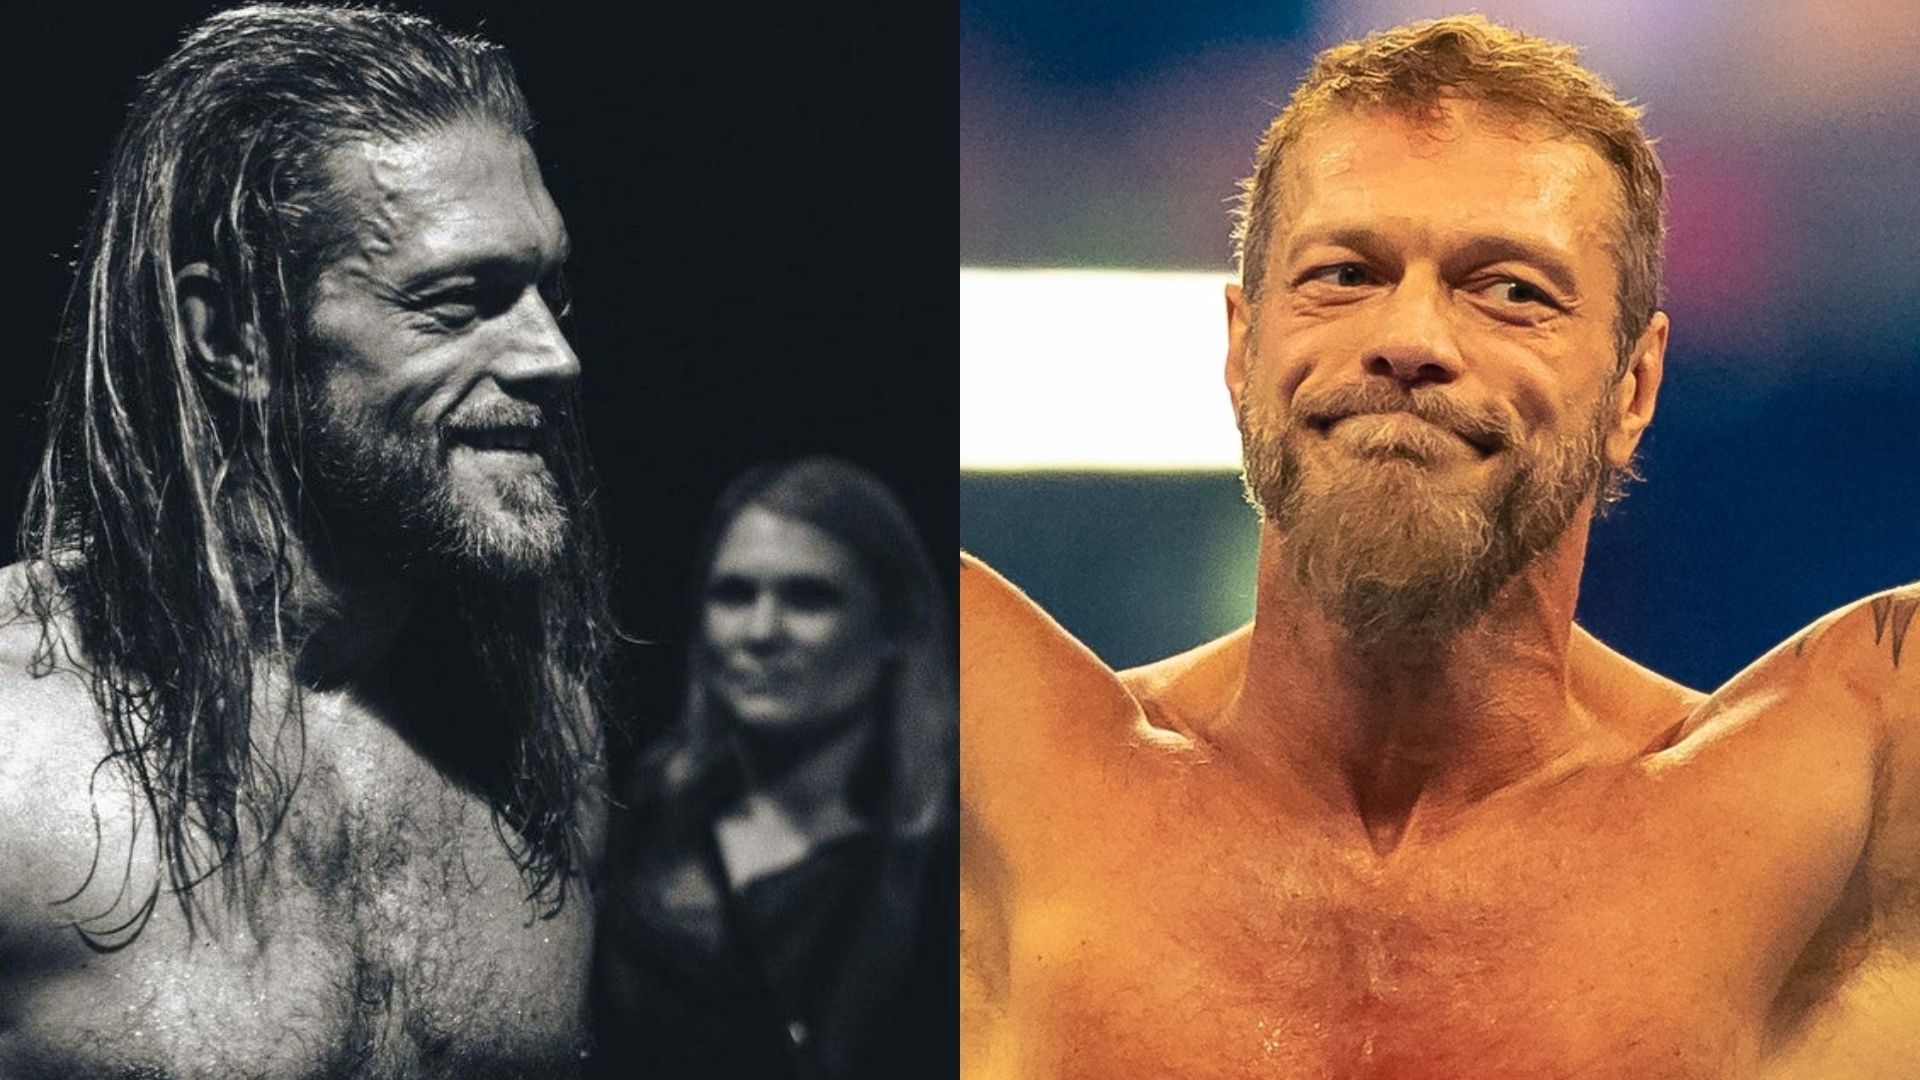 Edge will wrestle Finn Balor inside Hell in a Cell tonight as WrestleMania Goes Hollywood!